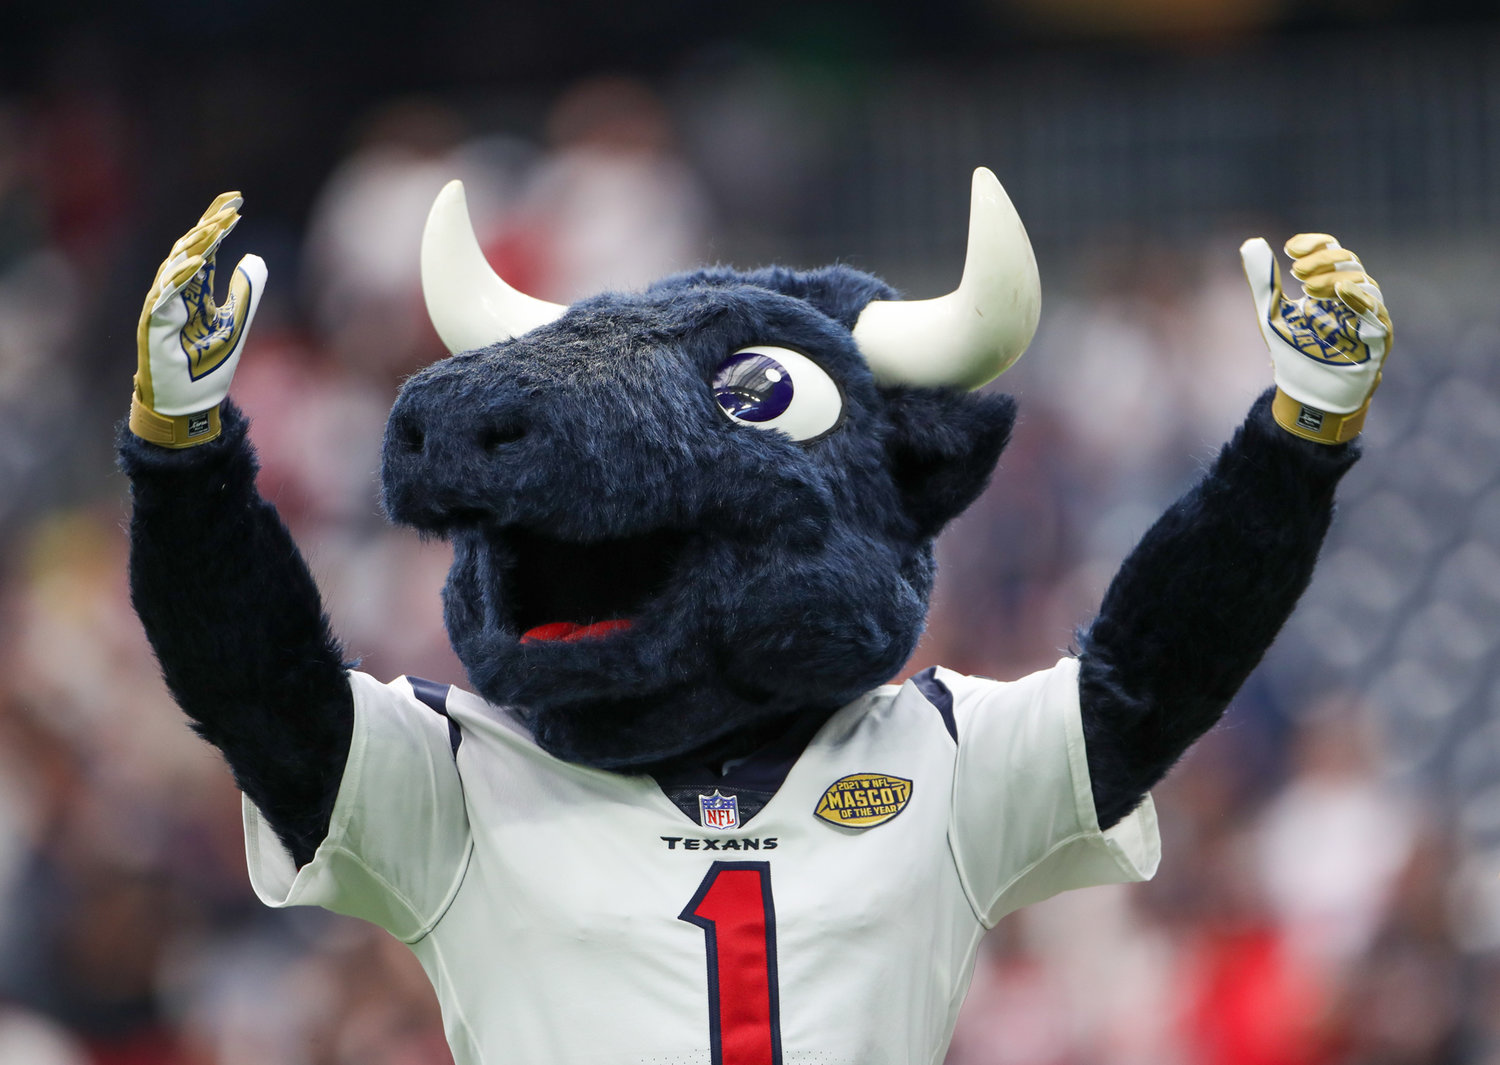 Houston Texans mascot Toro during the first half of an NFL game between the Houston Texans and the Jacksonville Jaguars on September 12, 2021 in Houston, Texas.